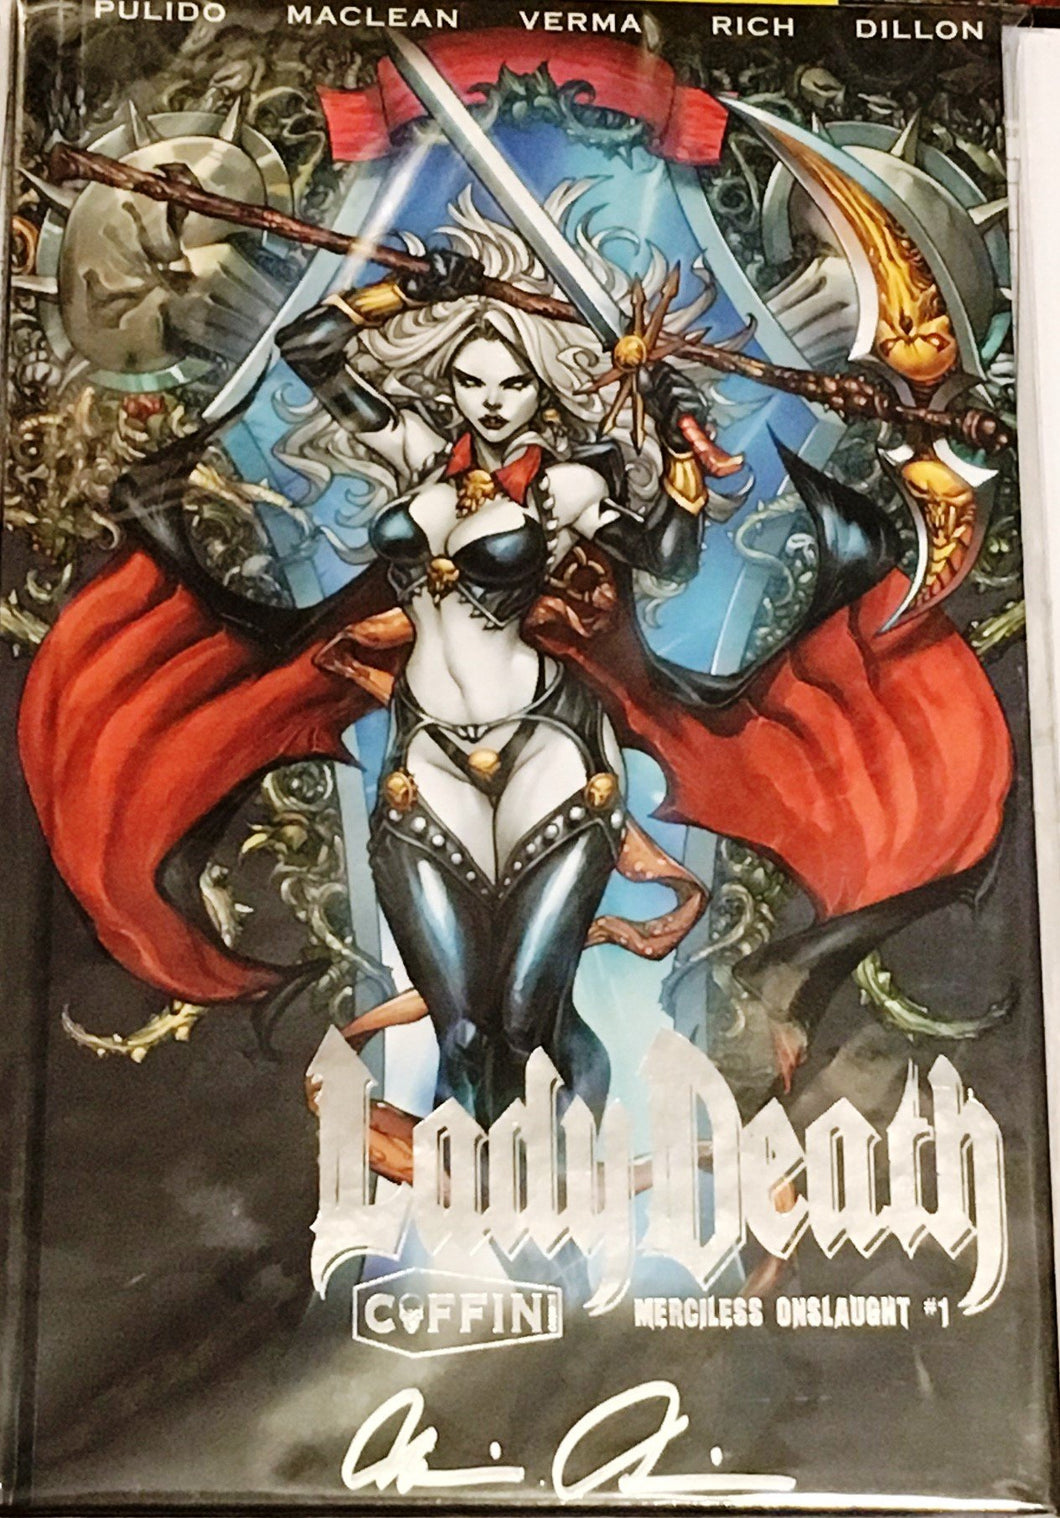 Lady Death: Merciless Onslaught - Hardcover Edition